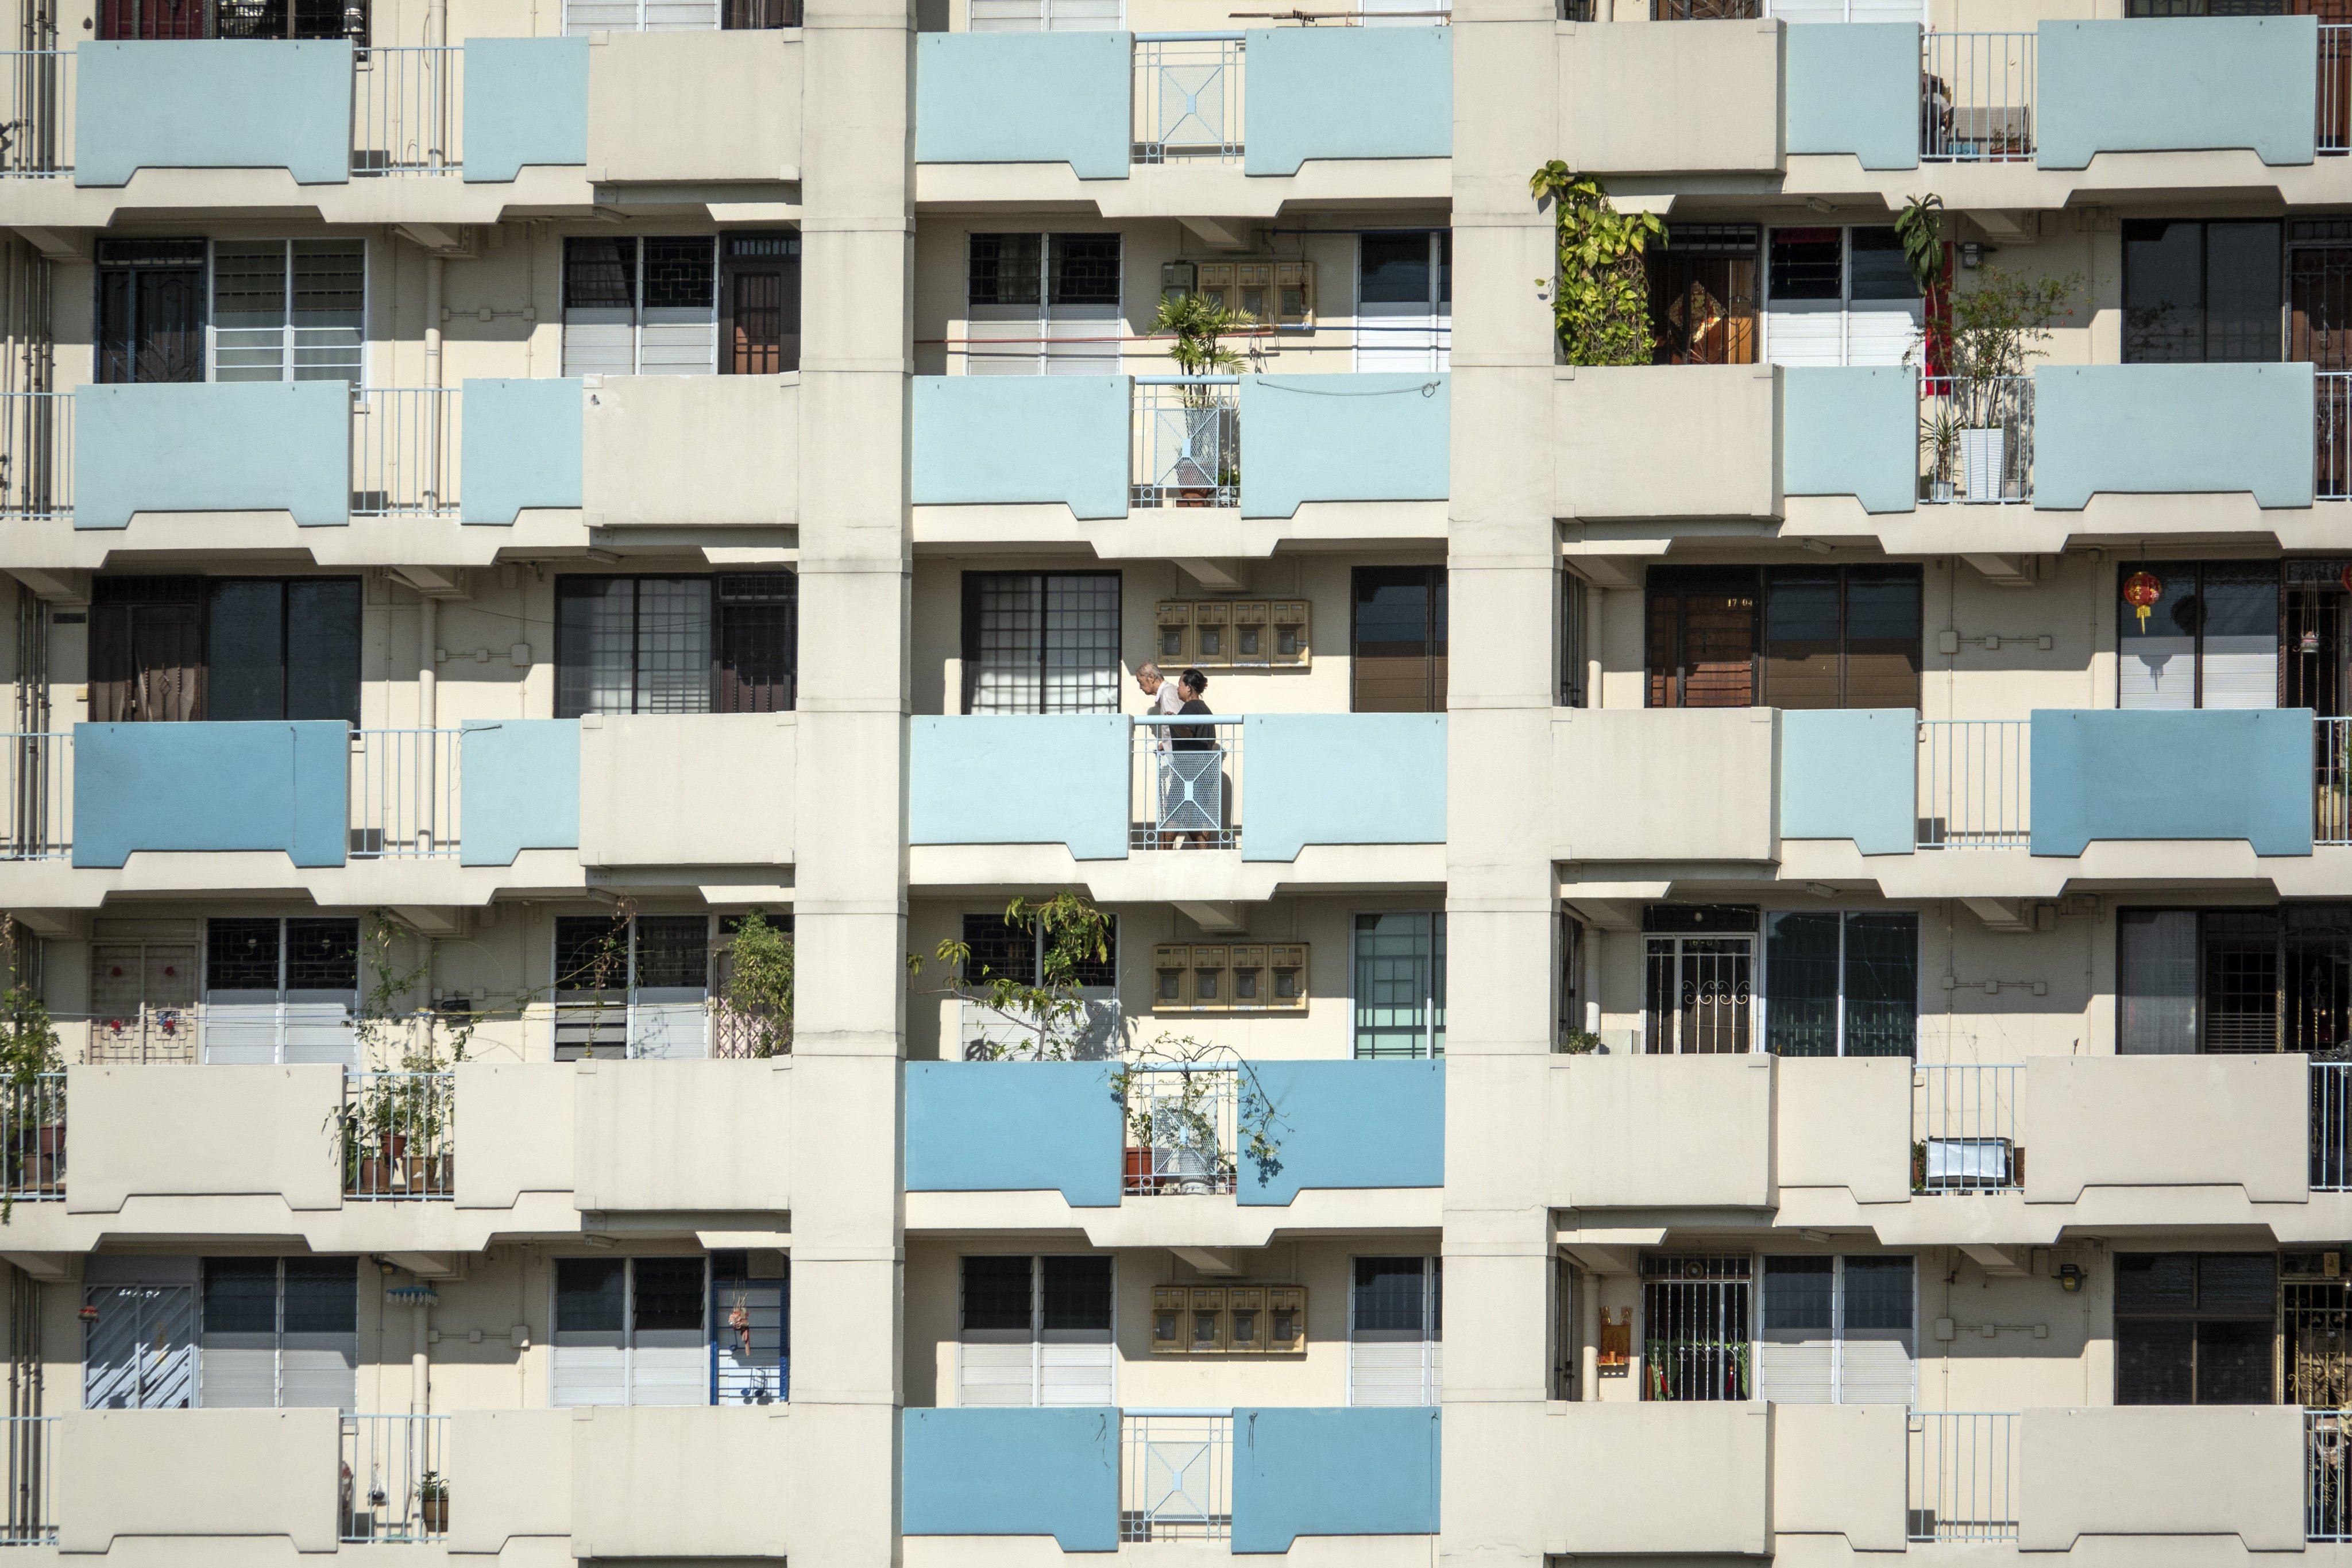 People walk along an external corridor at a Housing & Development Board (HDB) public housing estate in the Toa Payoh district of Singapore in April 2019. Photo: Bloomberg